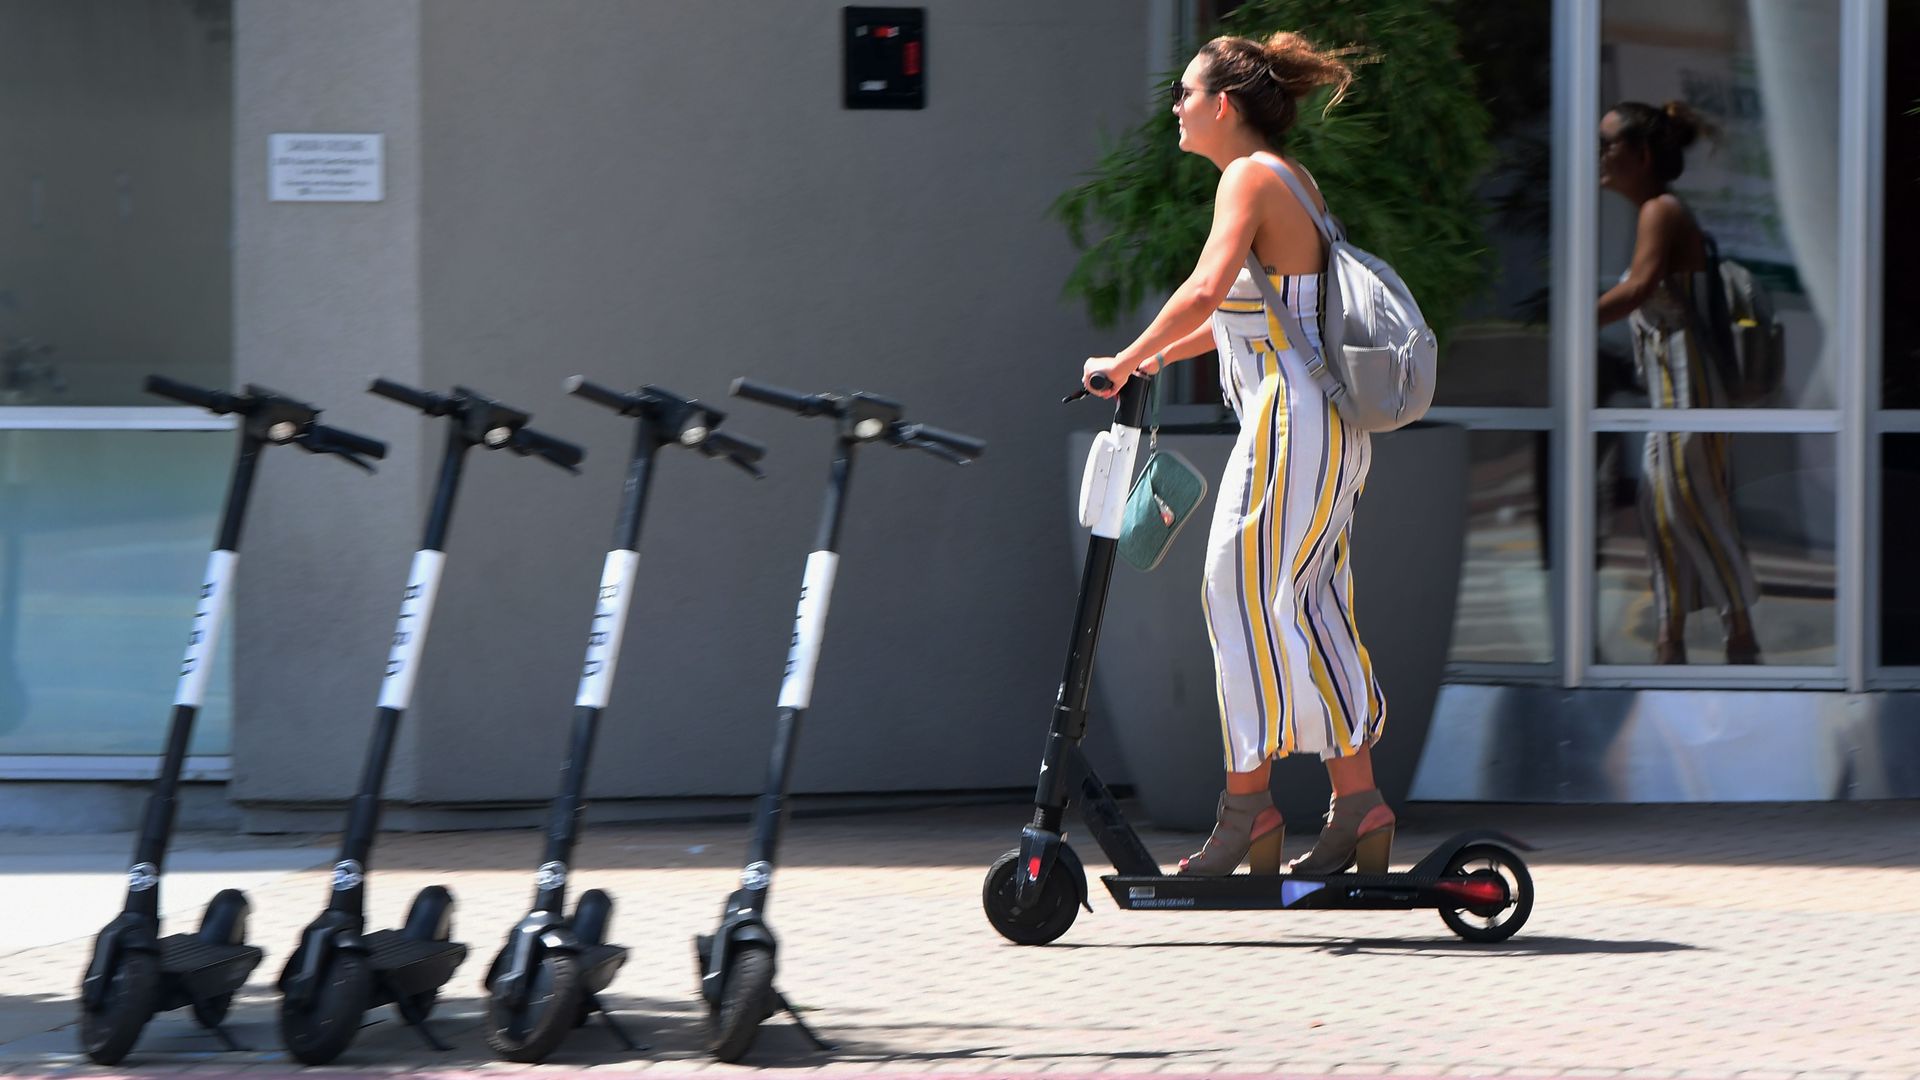 A woman riding an e-scooter in a city.